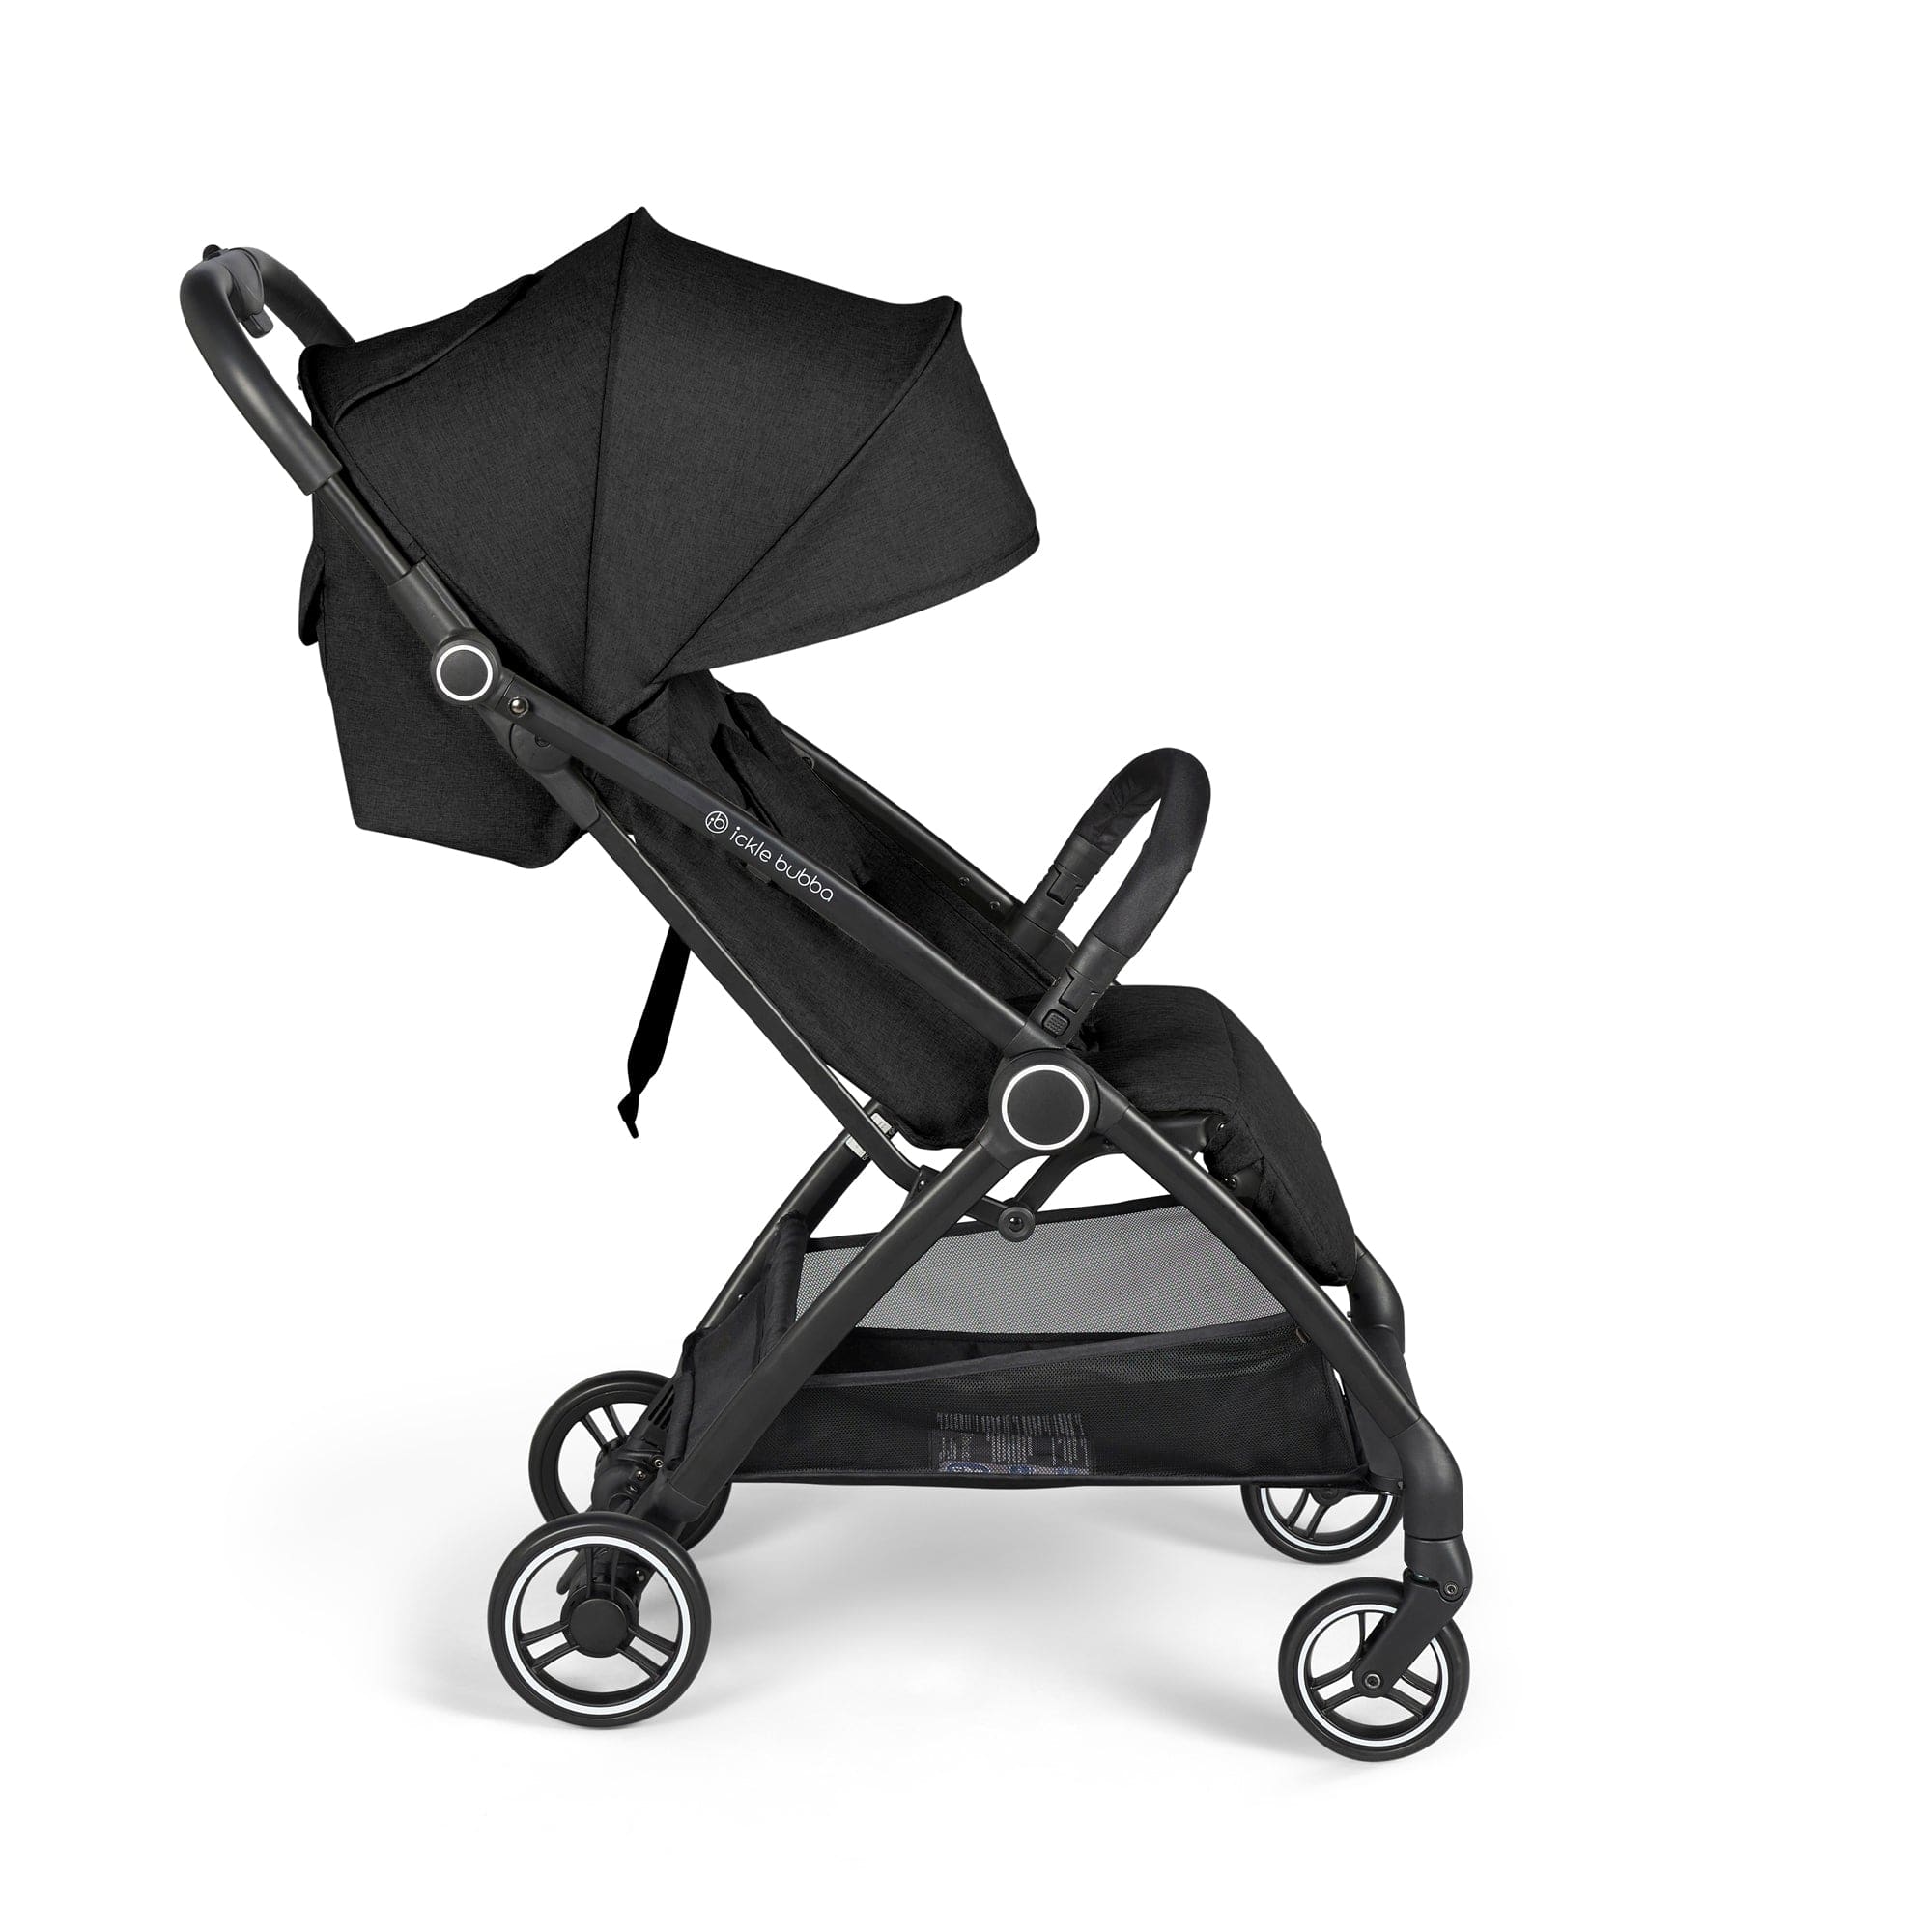 Ickle Bubba baby pushchairs Ickle Bubba Aries Max Autofold Stroller - Black 15-005-200-001